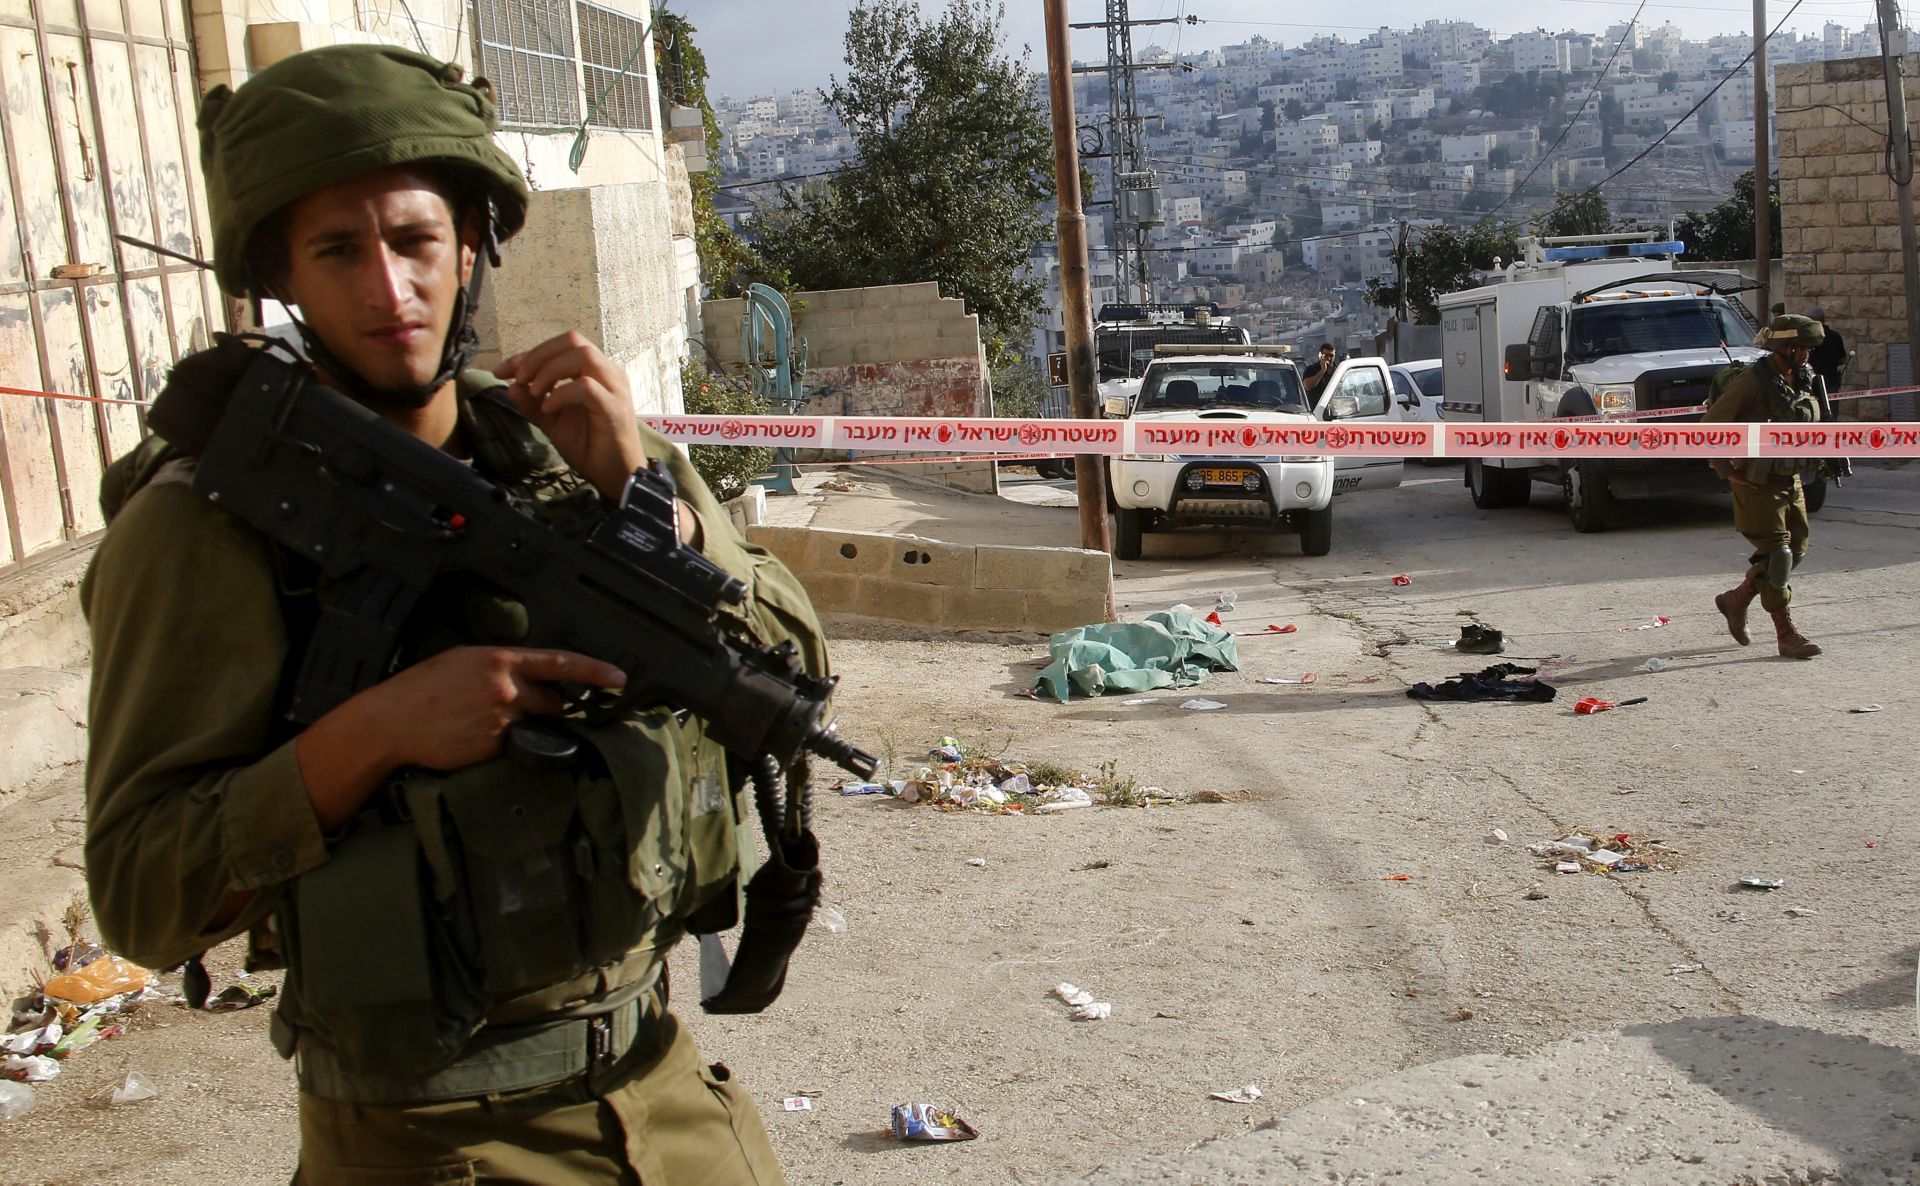 epa05543752 An armed Israeli army soldier stands guards near the sealed off scene of what the Israeli military said was a stabbing attack in Tal Rumaida, in the West Bank city of Hebron, 17 September 2016. Israeli military said a Palestinian assailant was shot dead after attacking a soldier with a knife.  EPA/ABED AL HASHLAMOUN